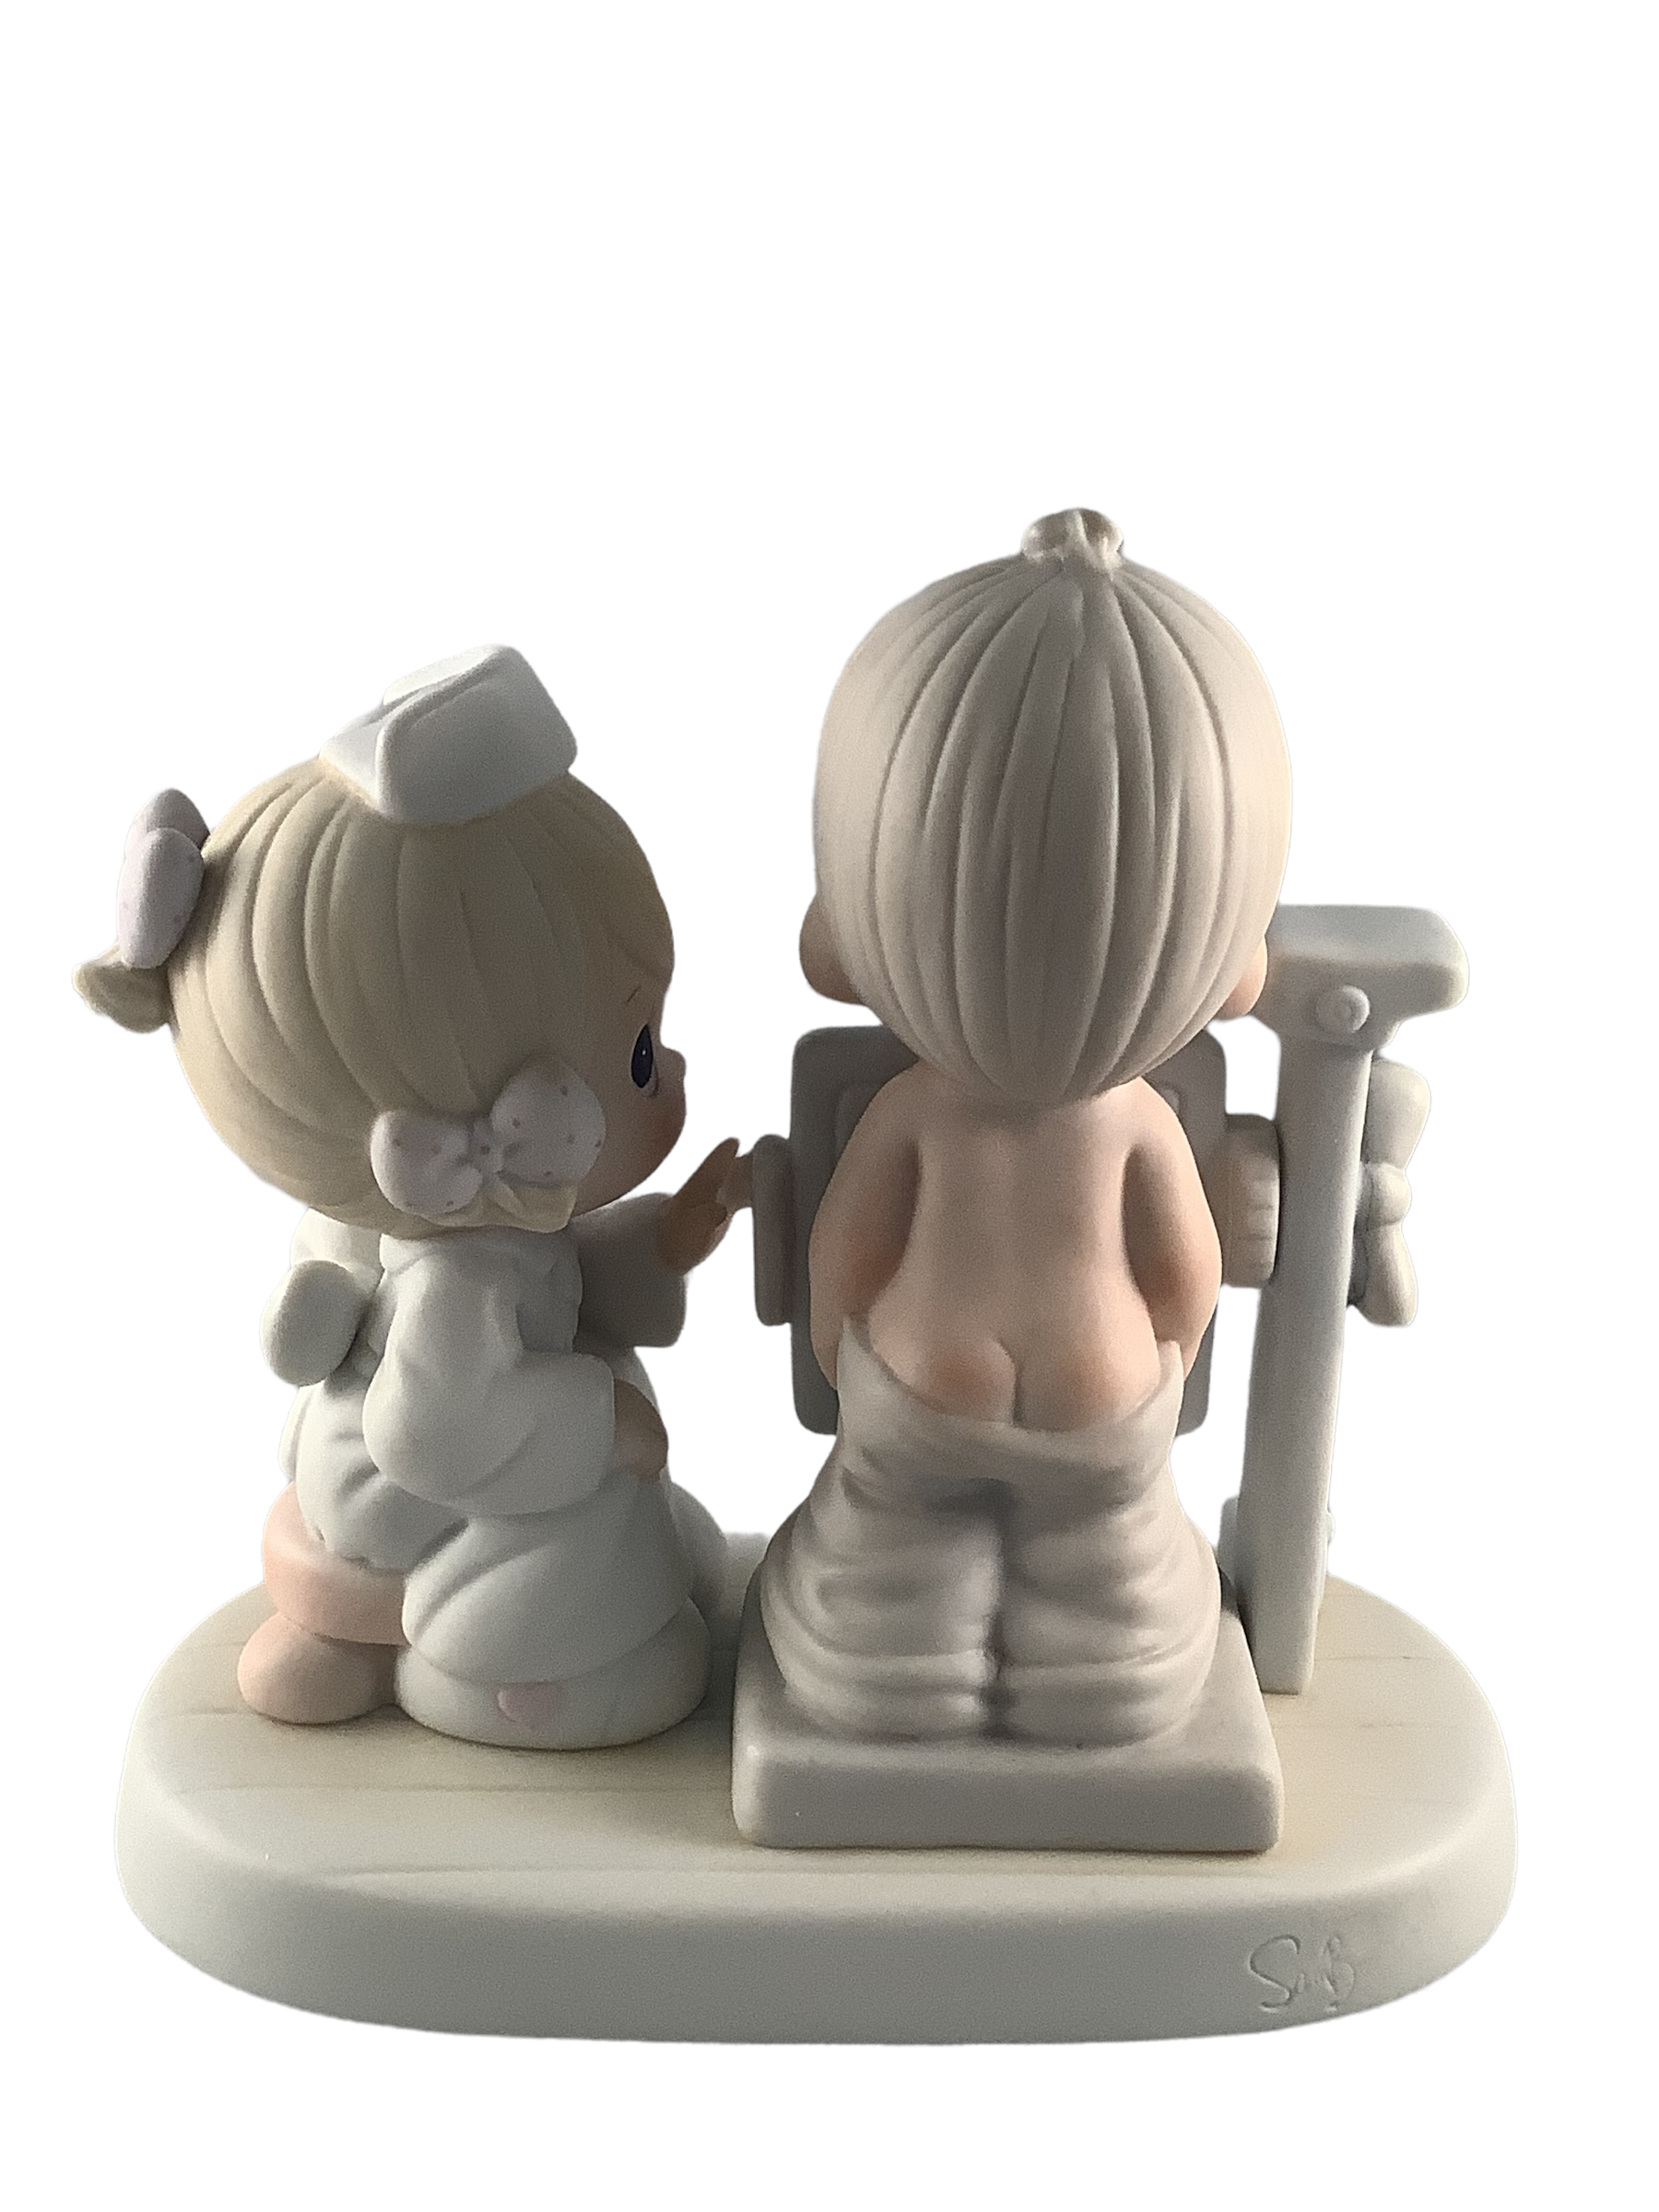 My Heart Is Exposed With Love - Precious Moment Figurine